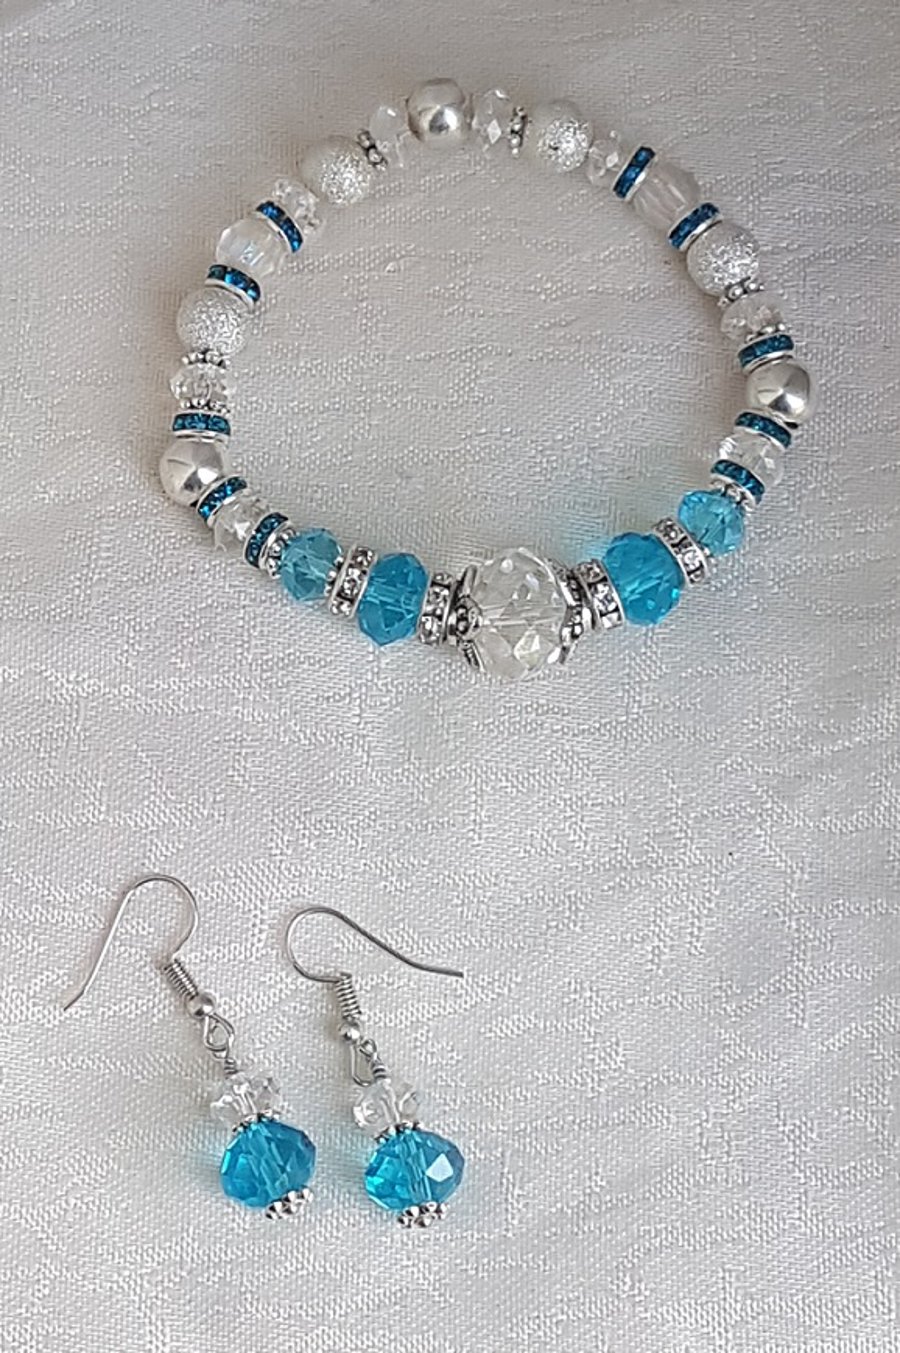 Gorgeous Crystal Ice Stretch Bracelet and Earring set